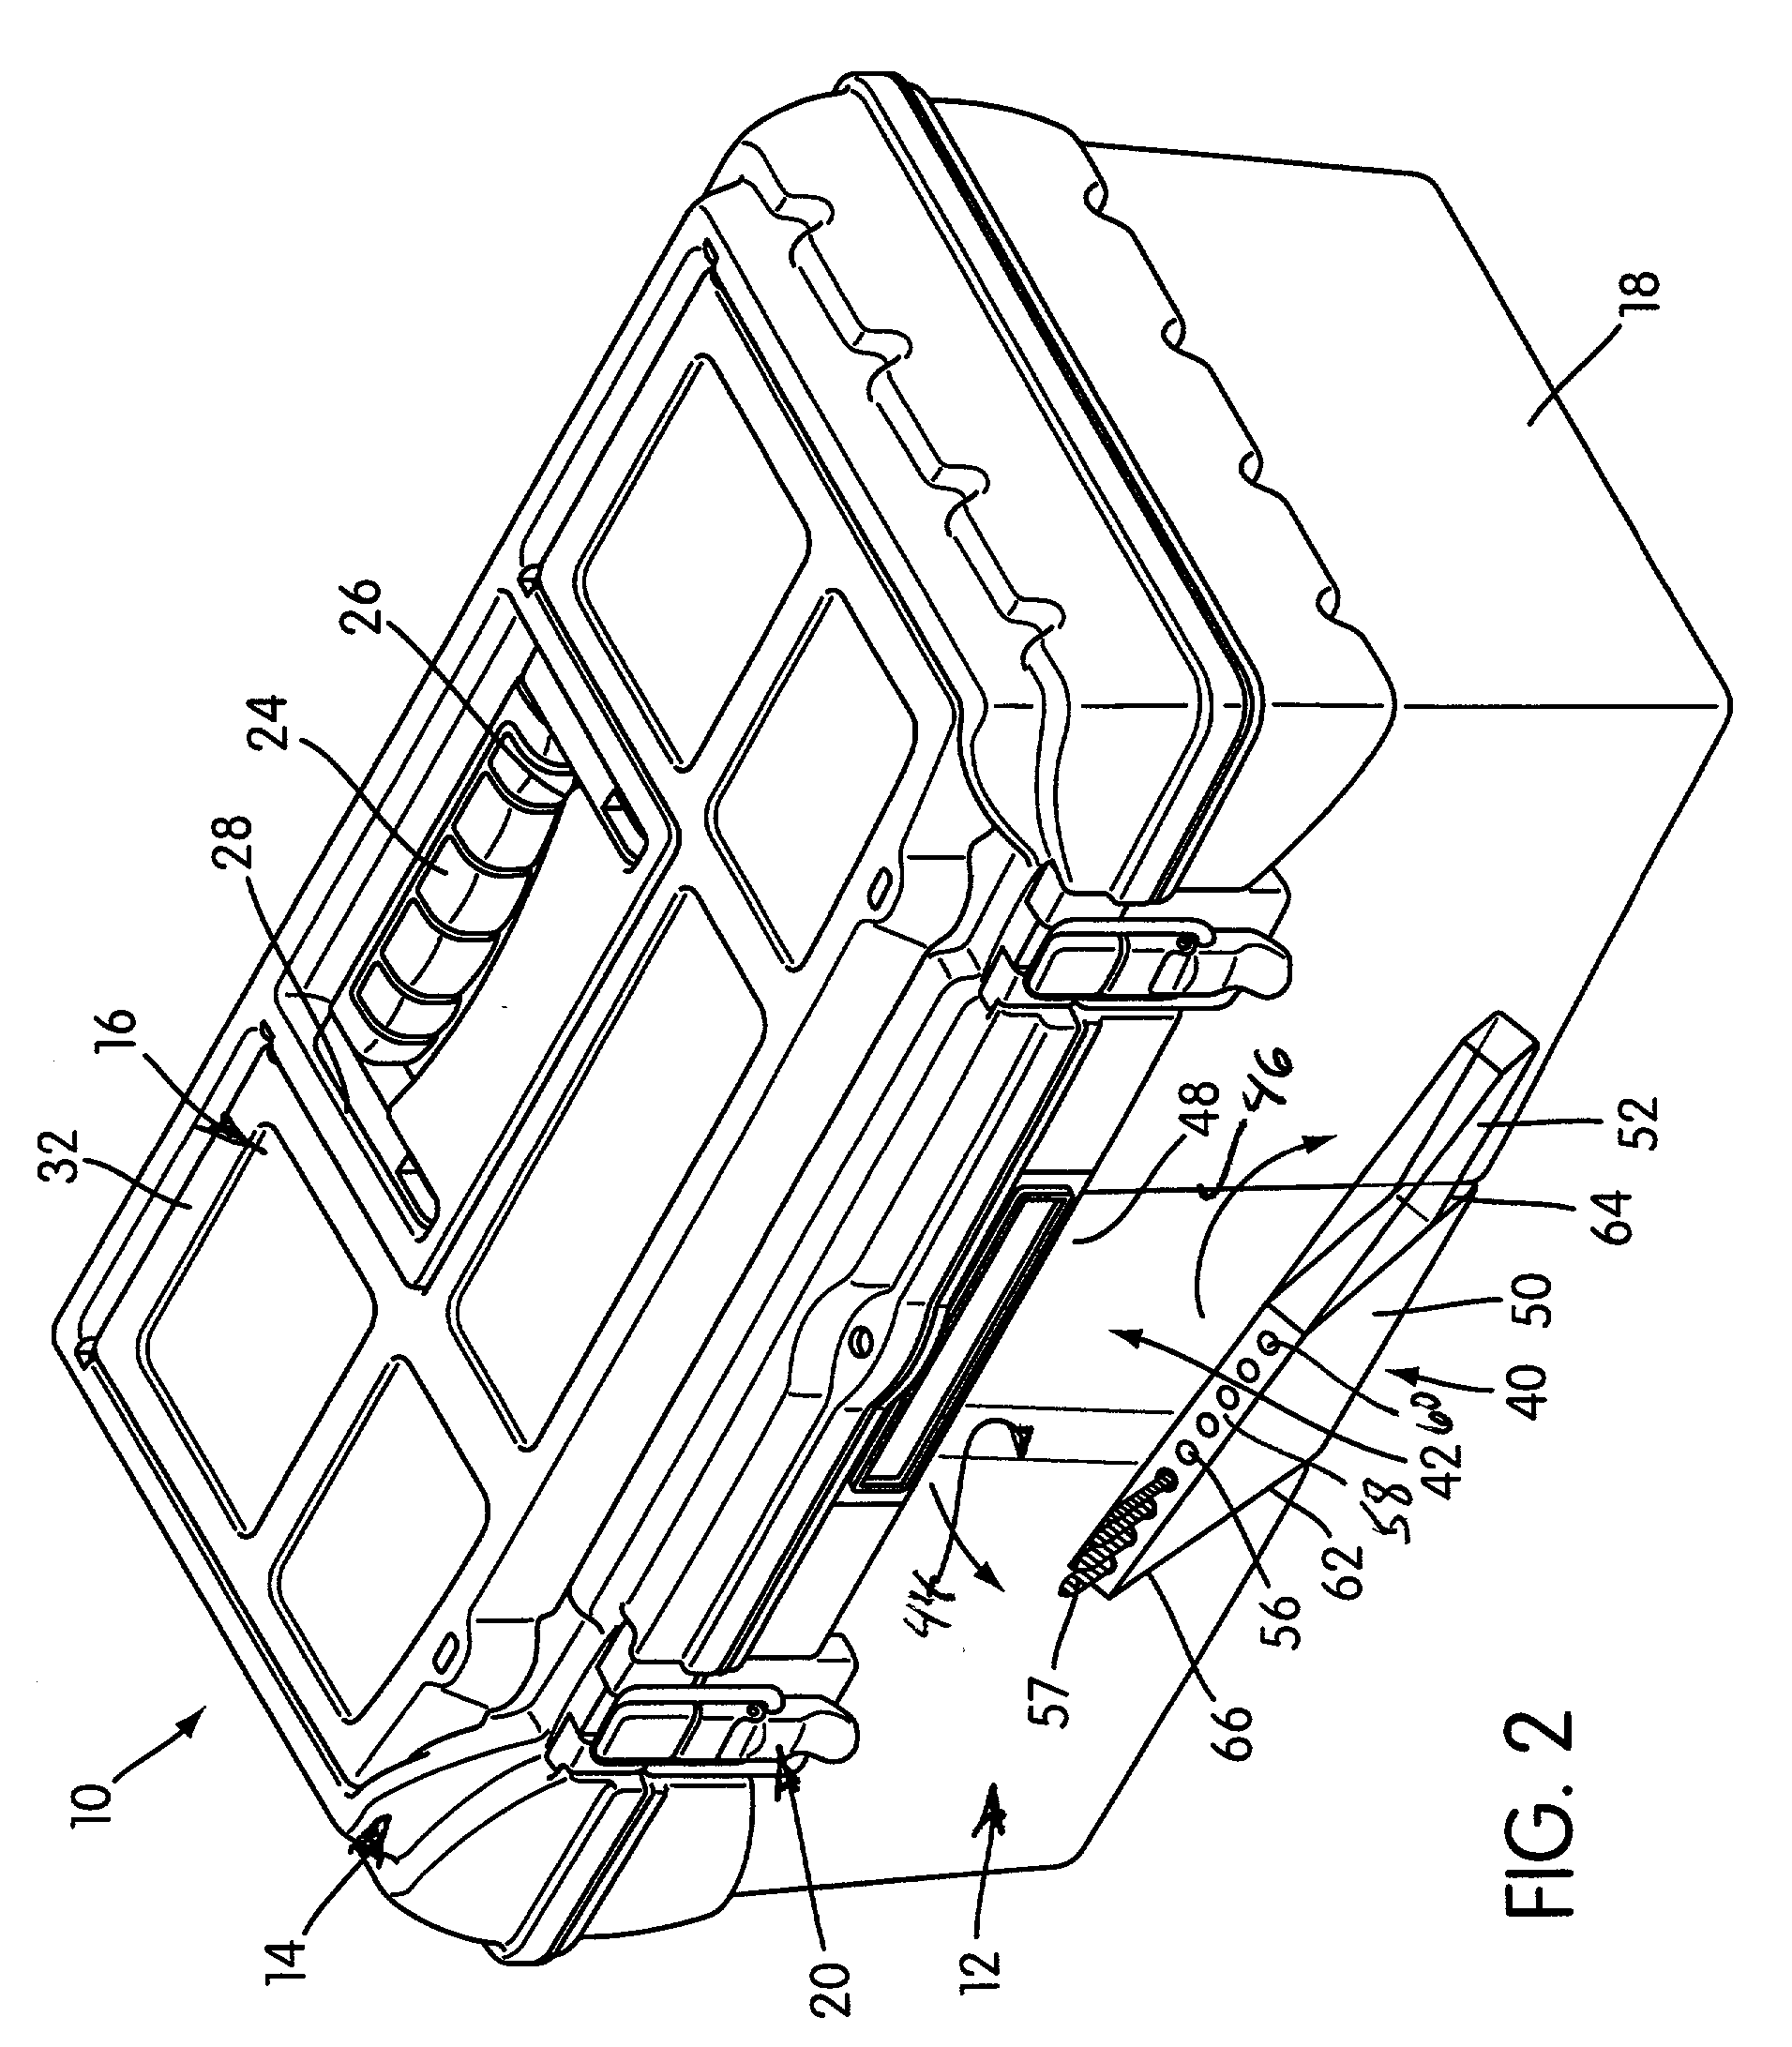 Toolbox with external compartment